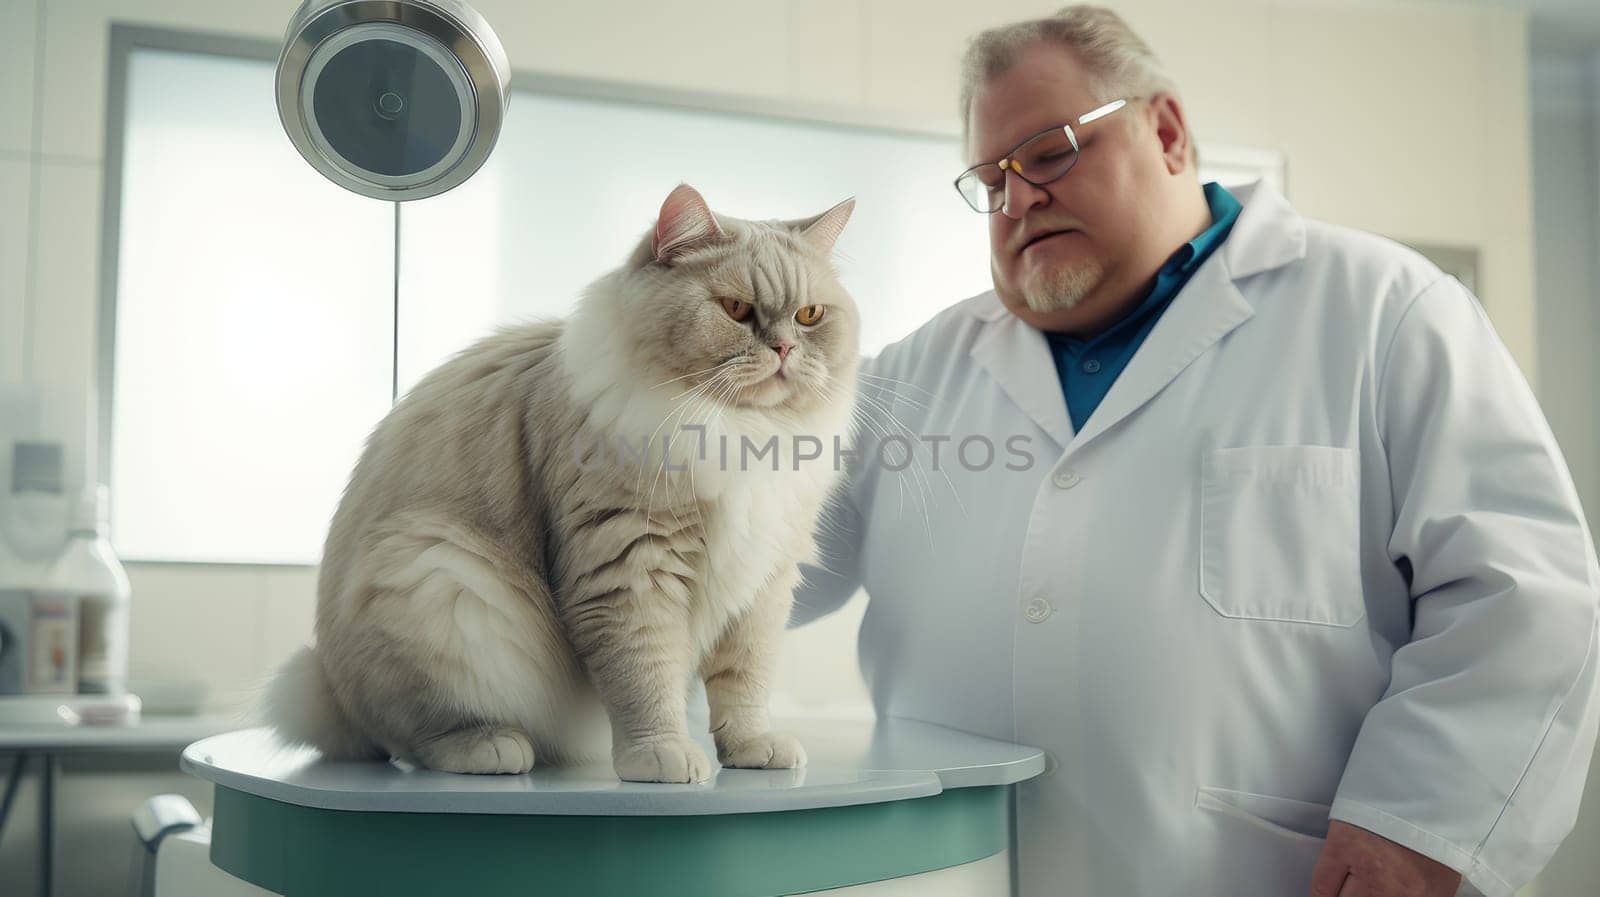 A large, fat, obese cat at a veterinarian's appointment in a clinic. Concept of care and concern for pets and obesity by Alla_Yurtayeva